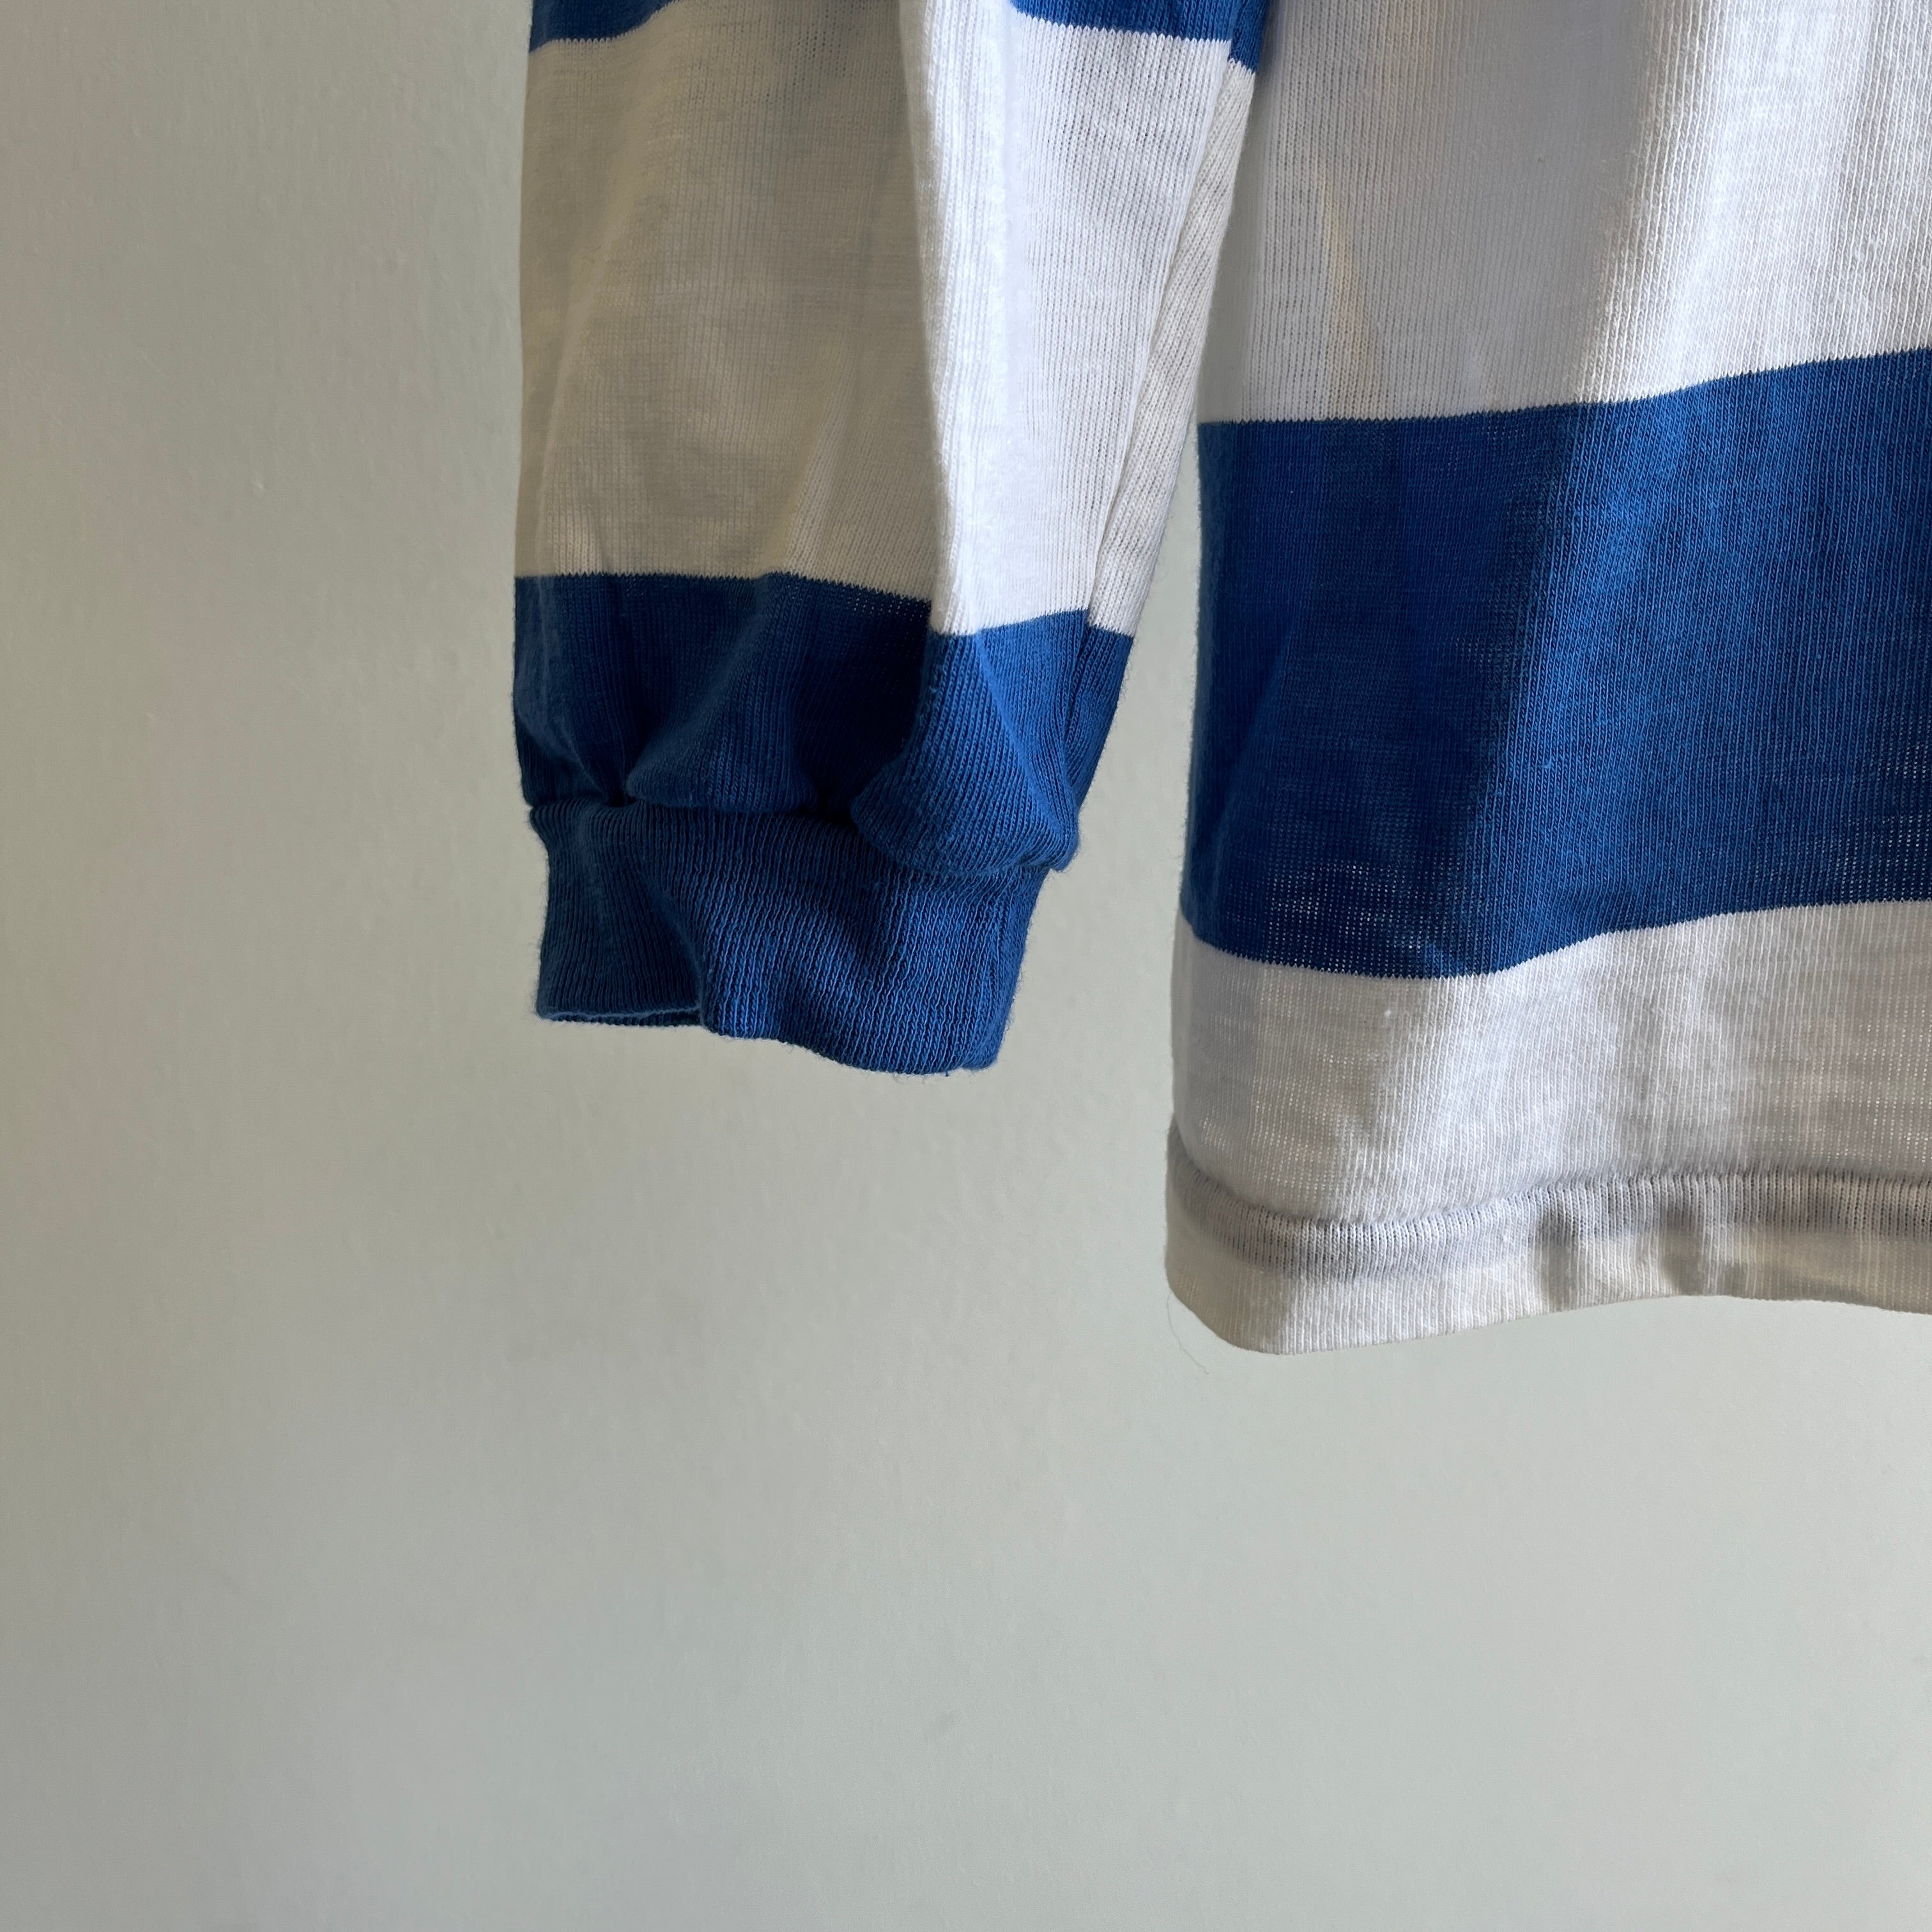 1980s Blue and White Striped Long Sleeve Pocket T-Shirt